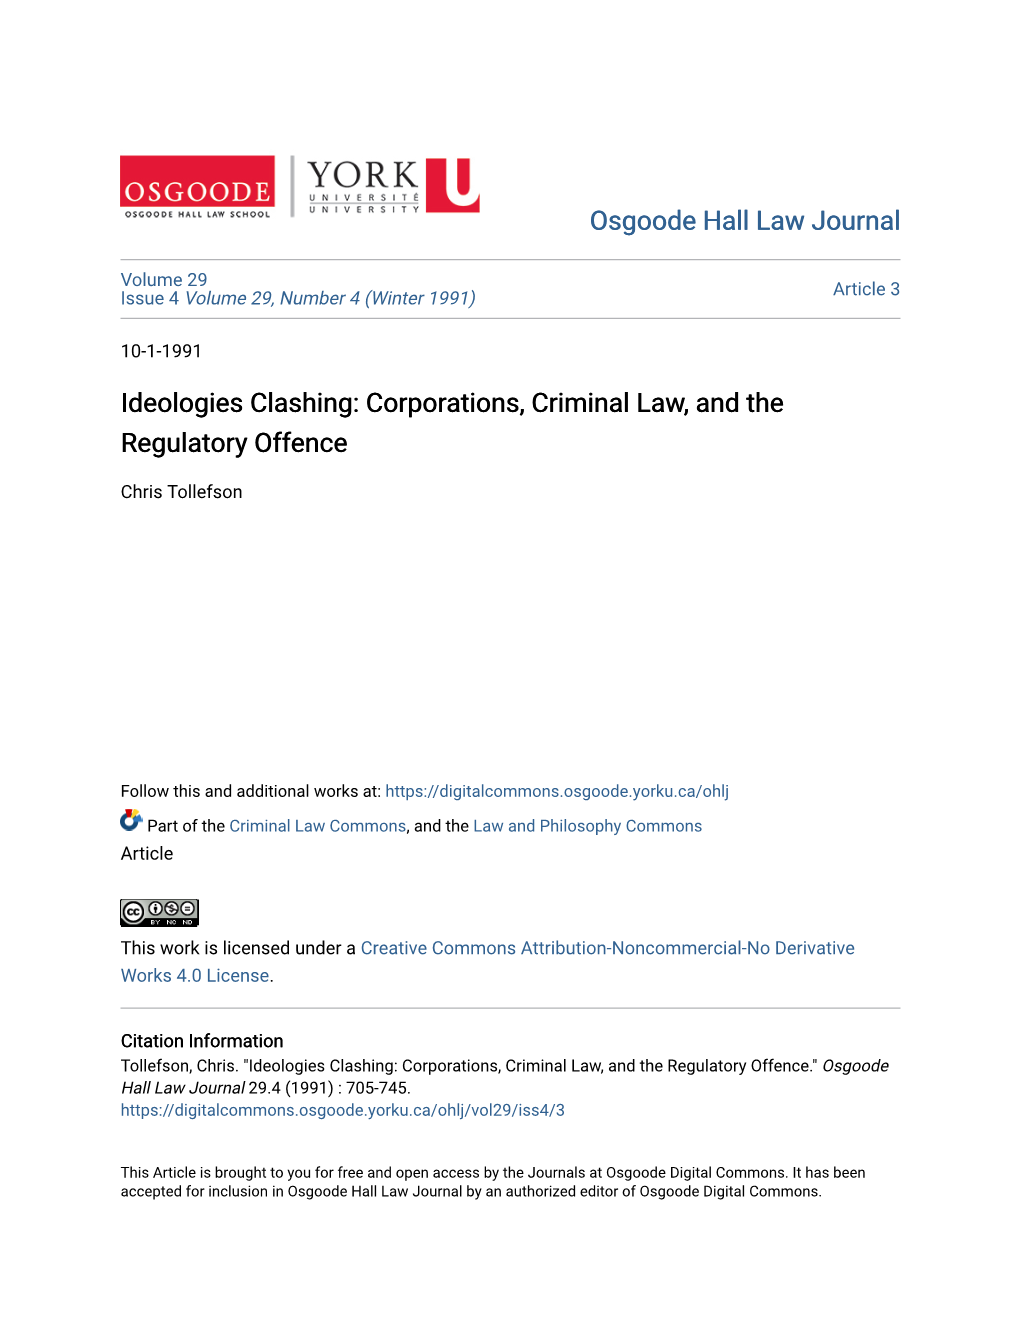 Ideologies Clashing: Corporations, Criminal Law, and the Regulatory Offence